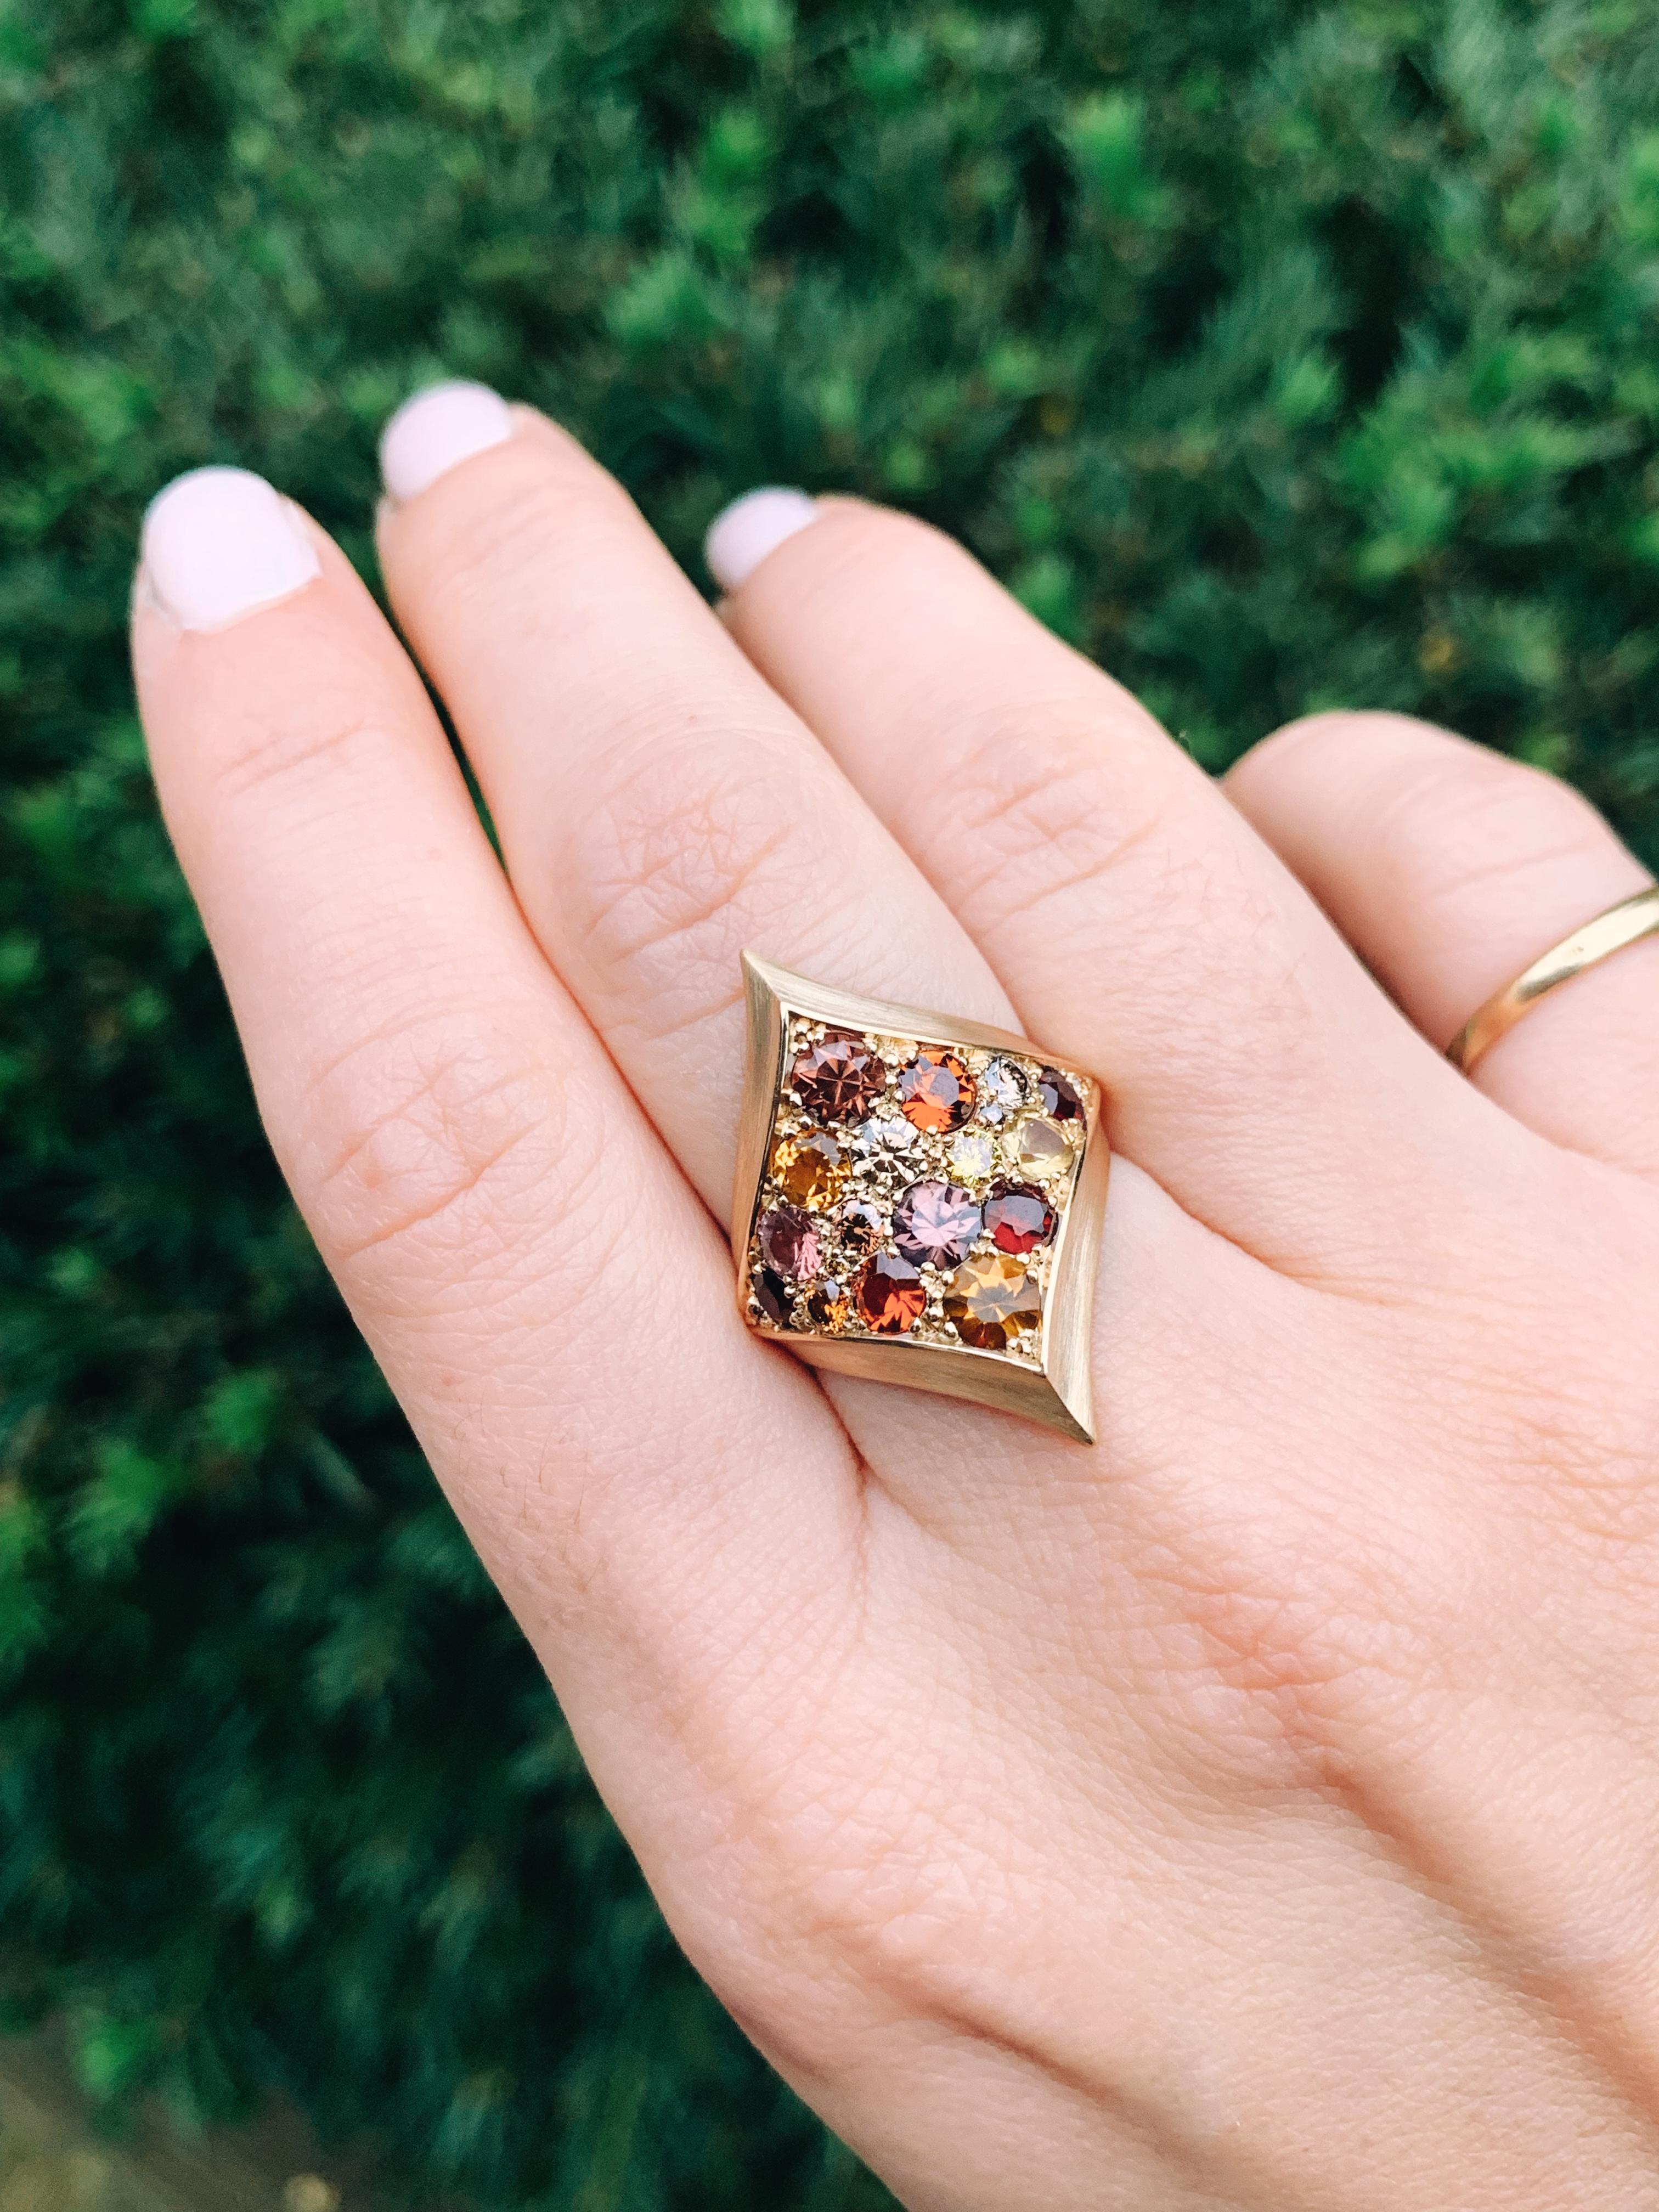 This ring aims to embody its wearer, and inspire a feeling of empowerment thanks to its shield shape. It invites you to strongly defend your beliefs and your values.

Made of 18k recycled gold, ethically mined zircons, garnets, citrins and cognac